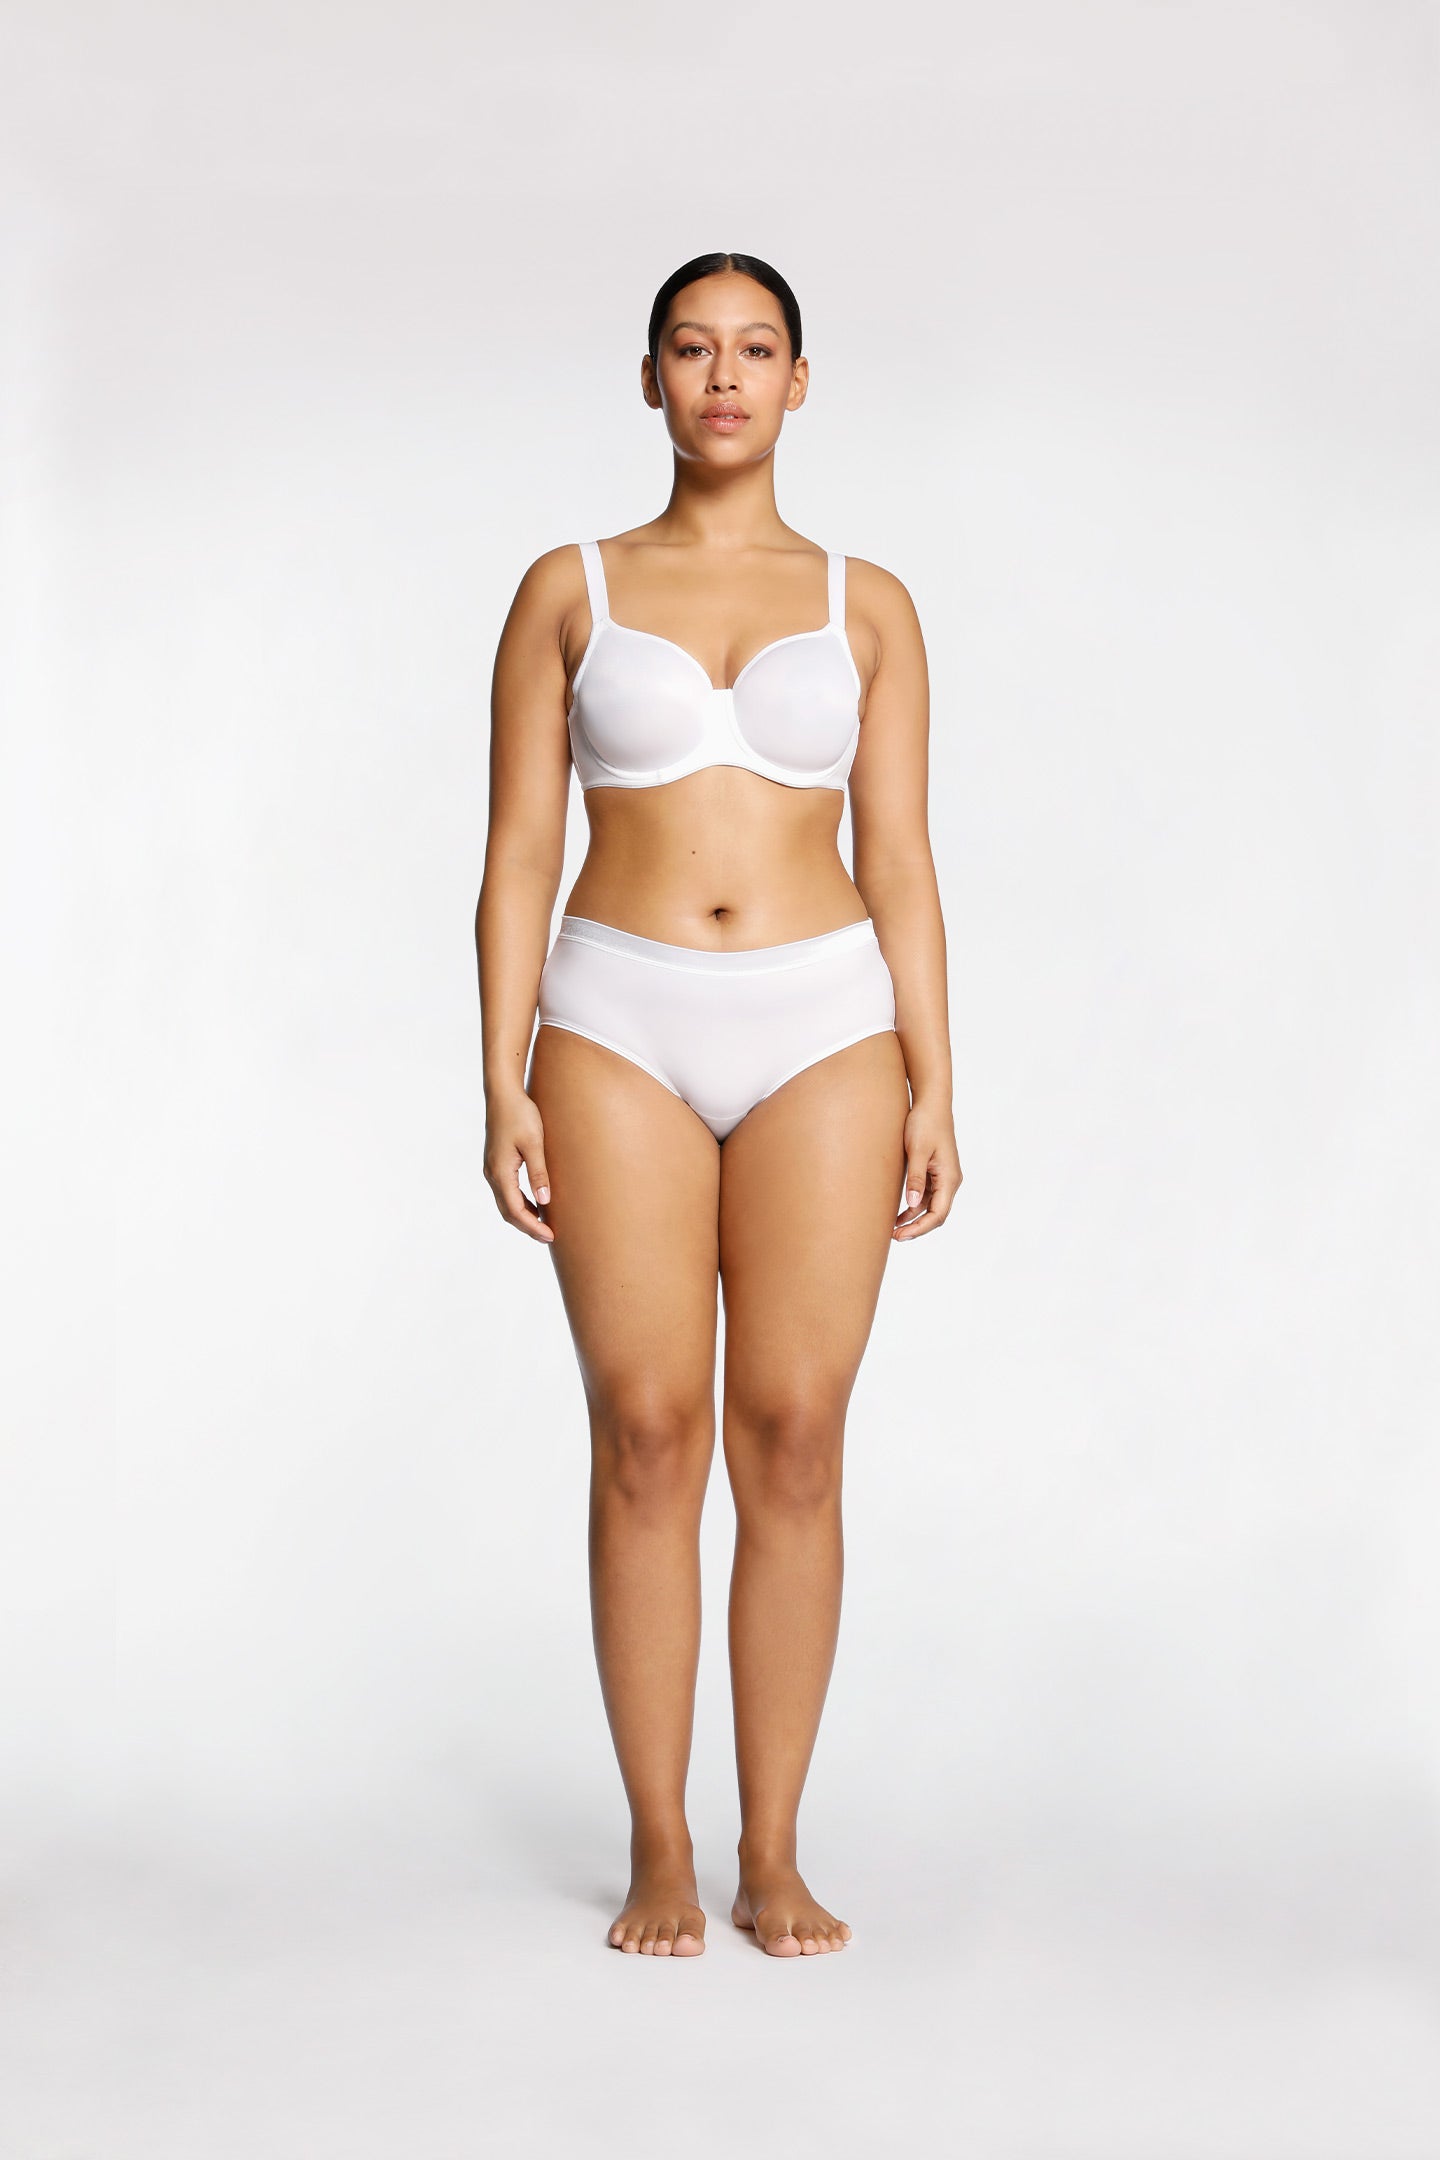 INTIMO WHITE SOPHISTICATES Soft Cup Bra SIZE 34DD 12DD $34.50